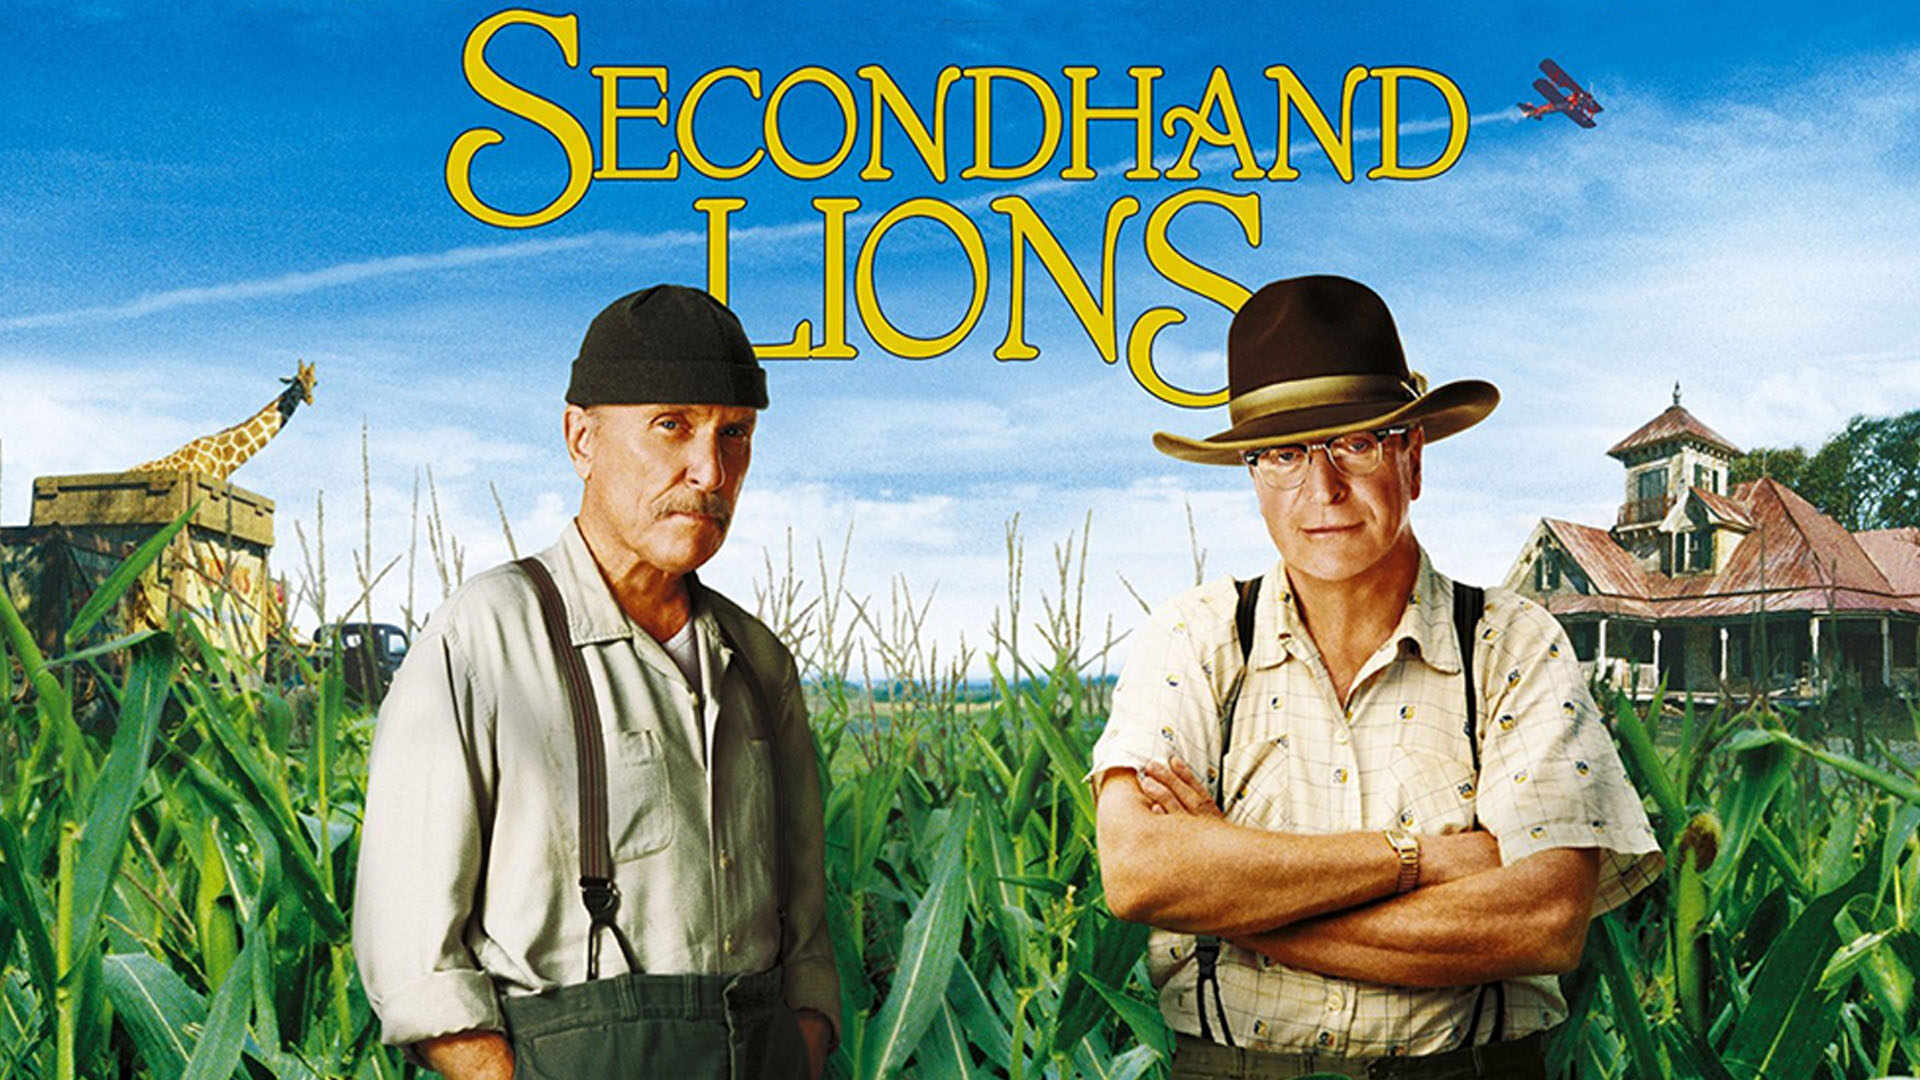 Secondhand Lions: Tall Tales - The American Society of Cinematographers  (en-US)